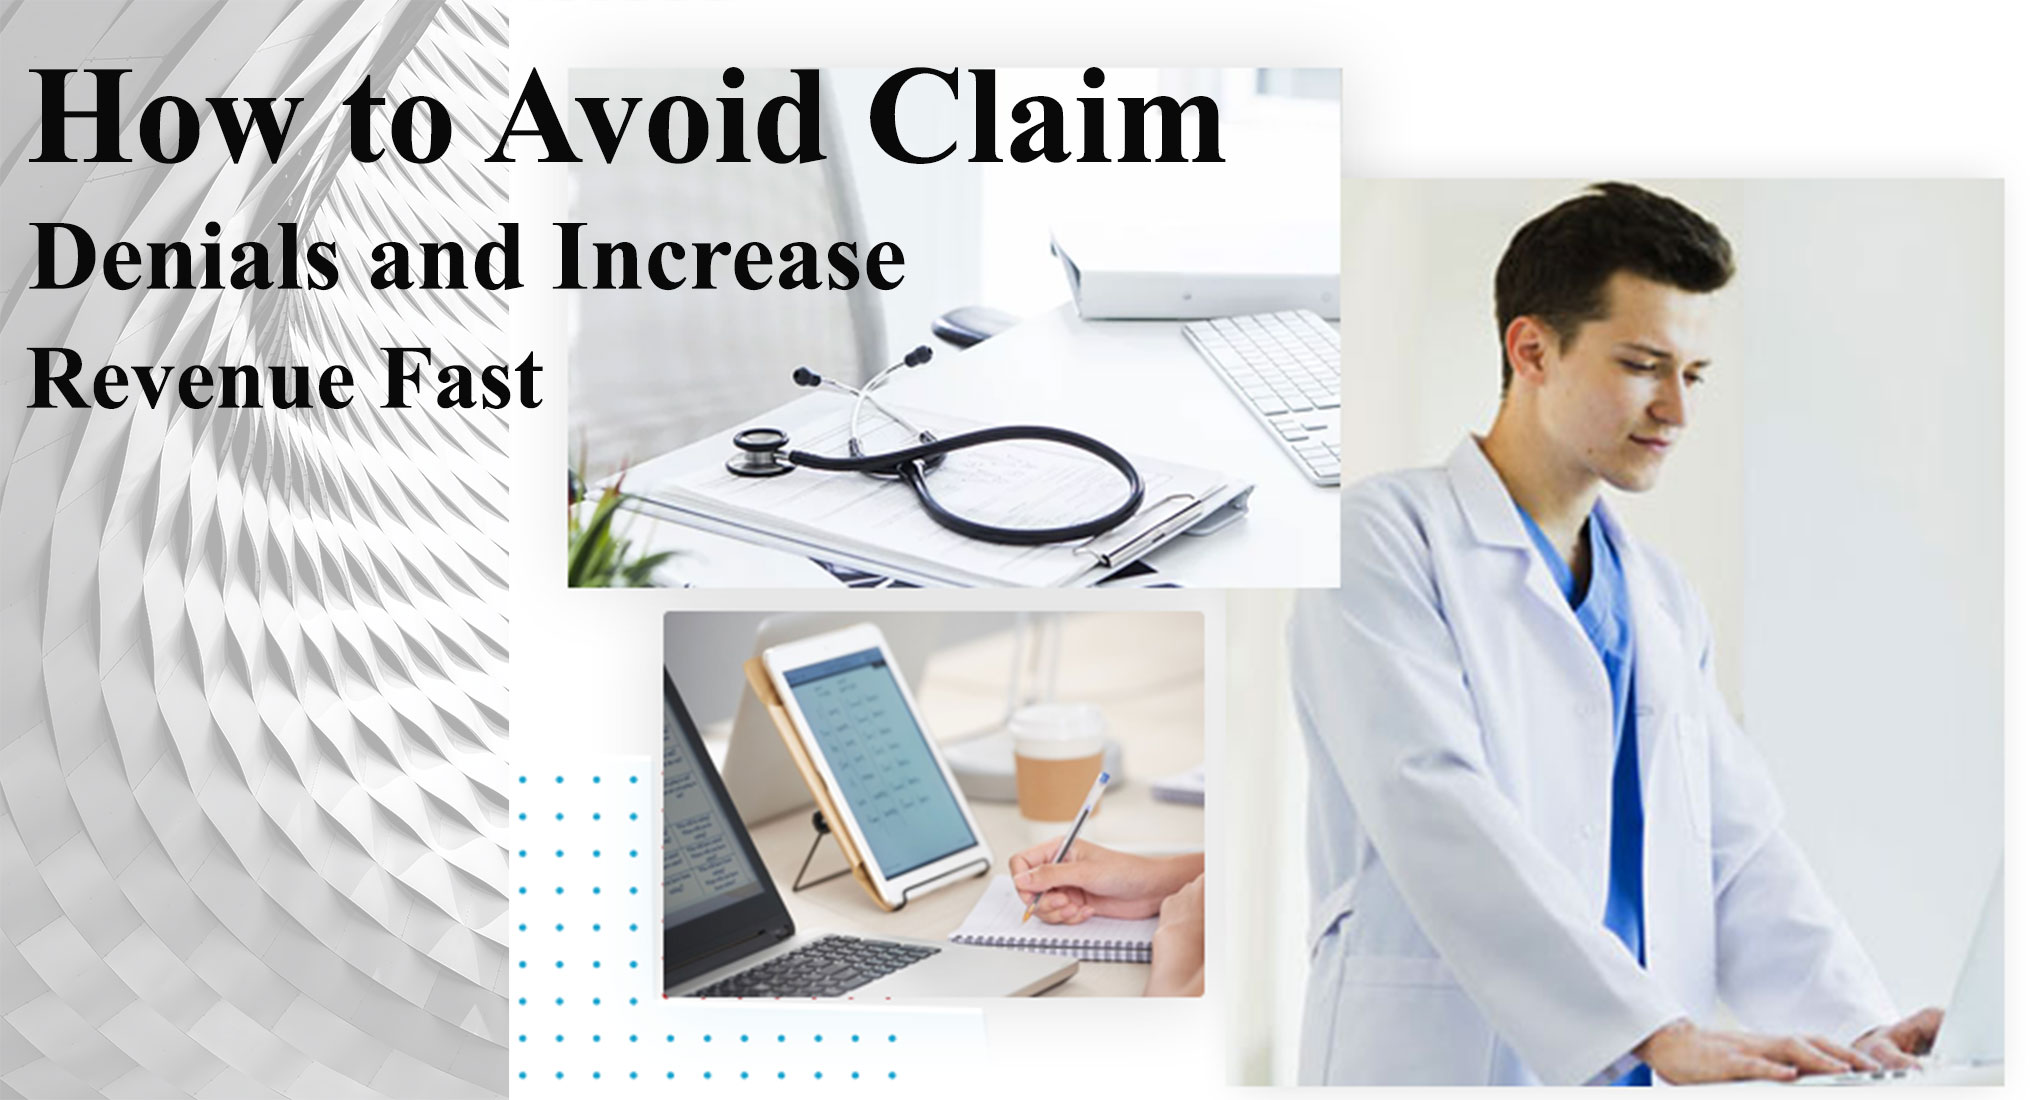 How to Avoid Medical Claim Denials and Increase Revenue Fast?